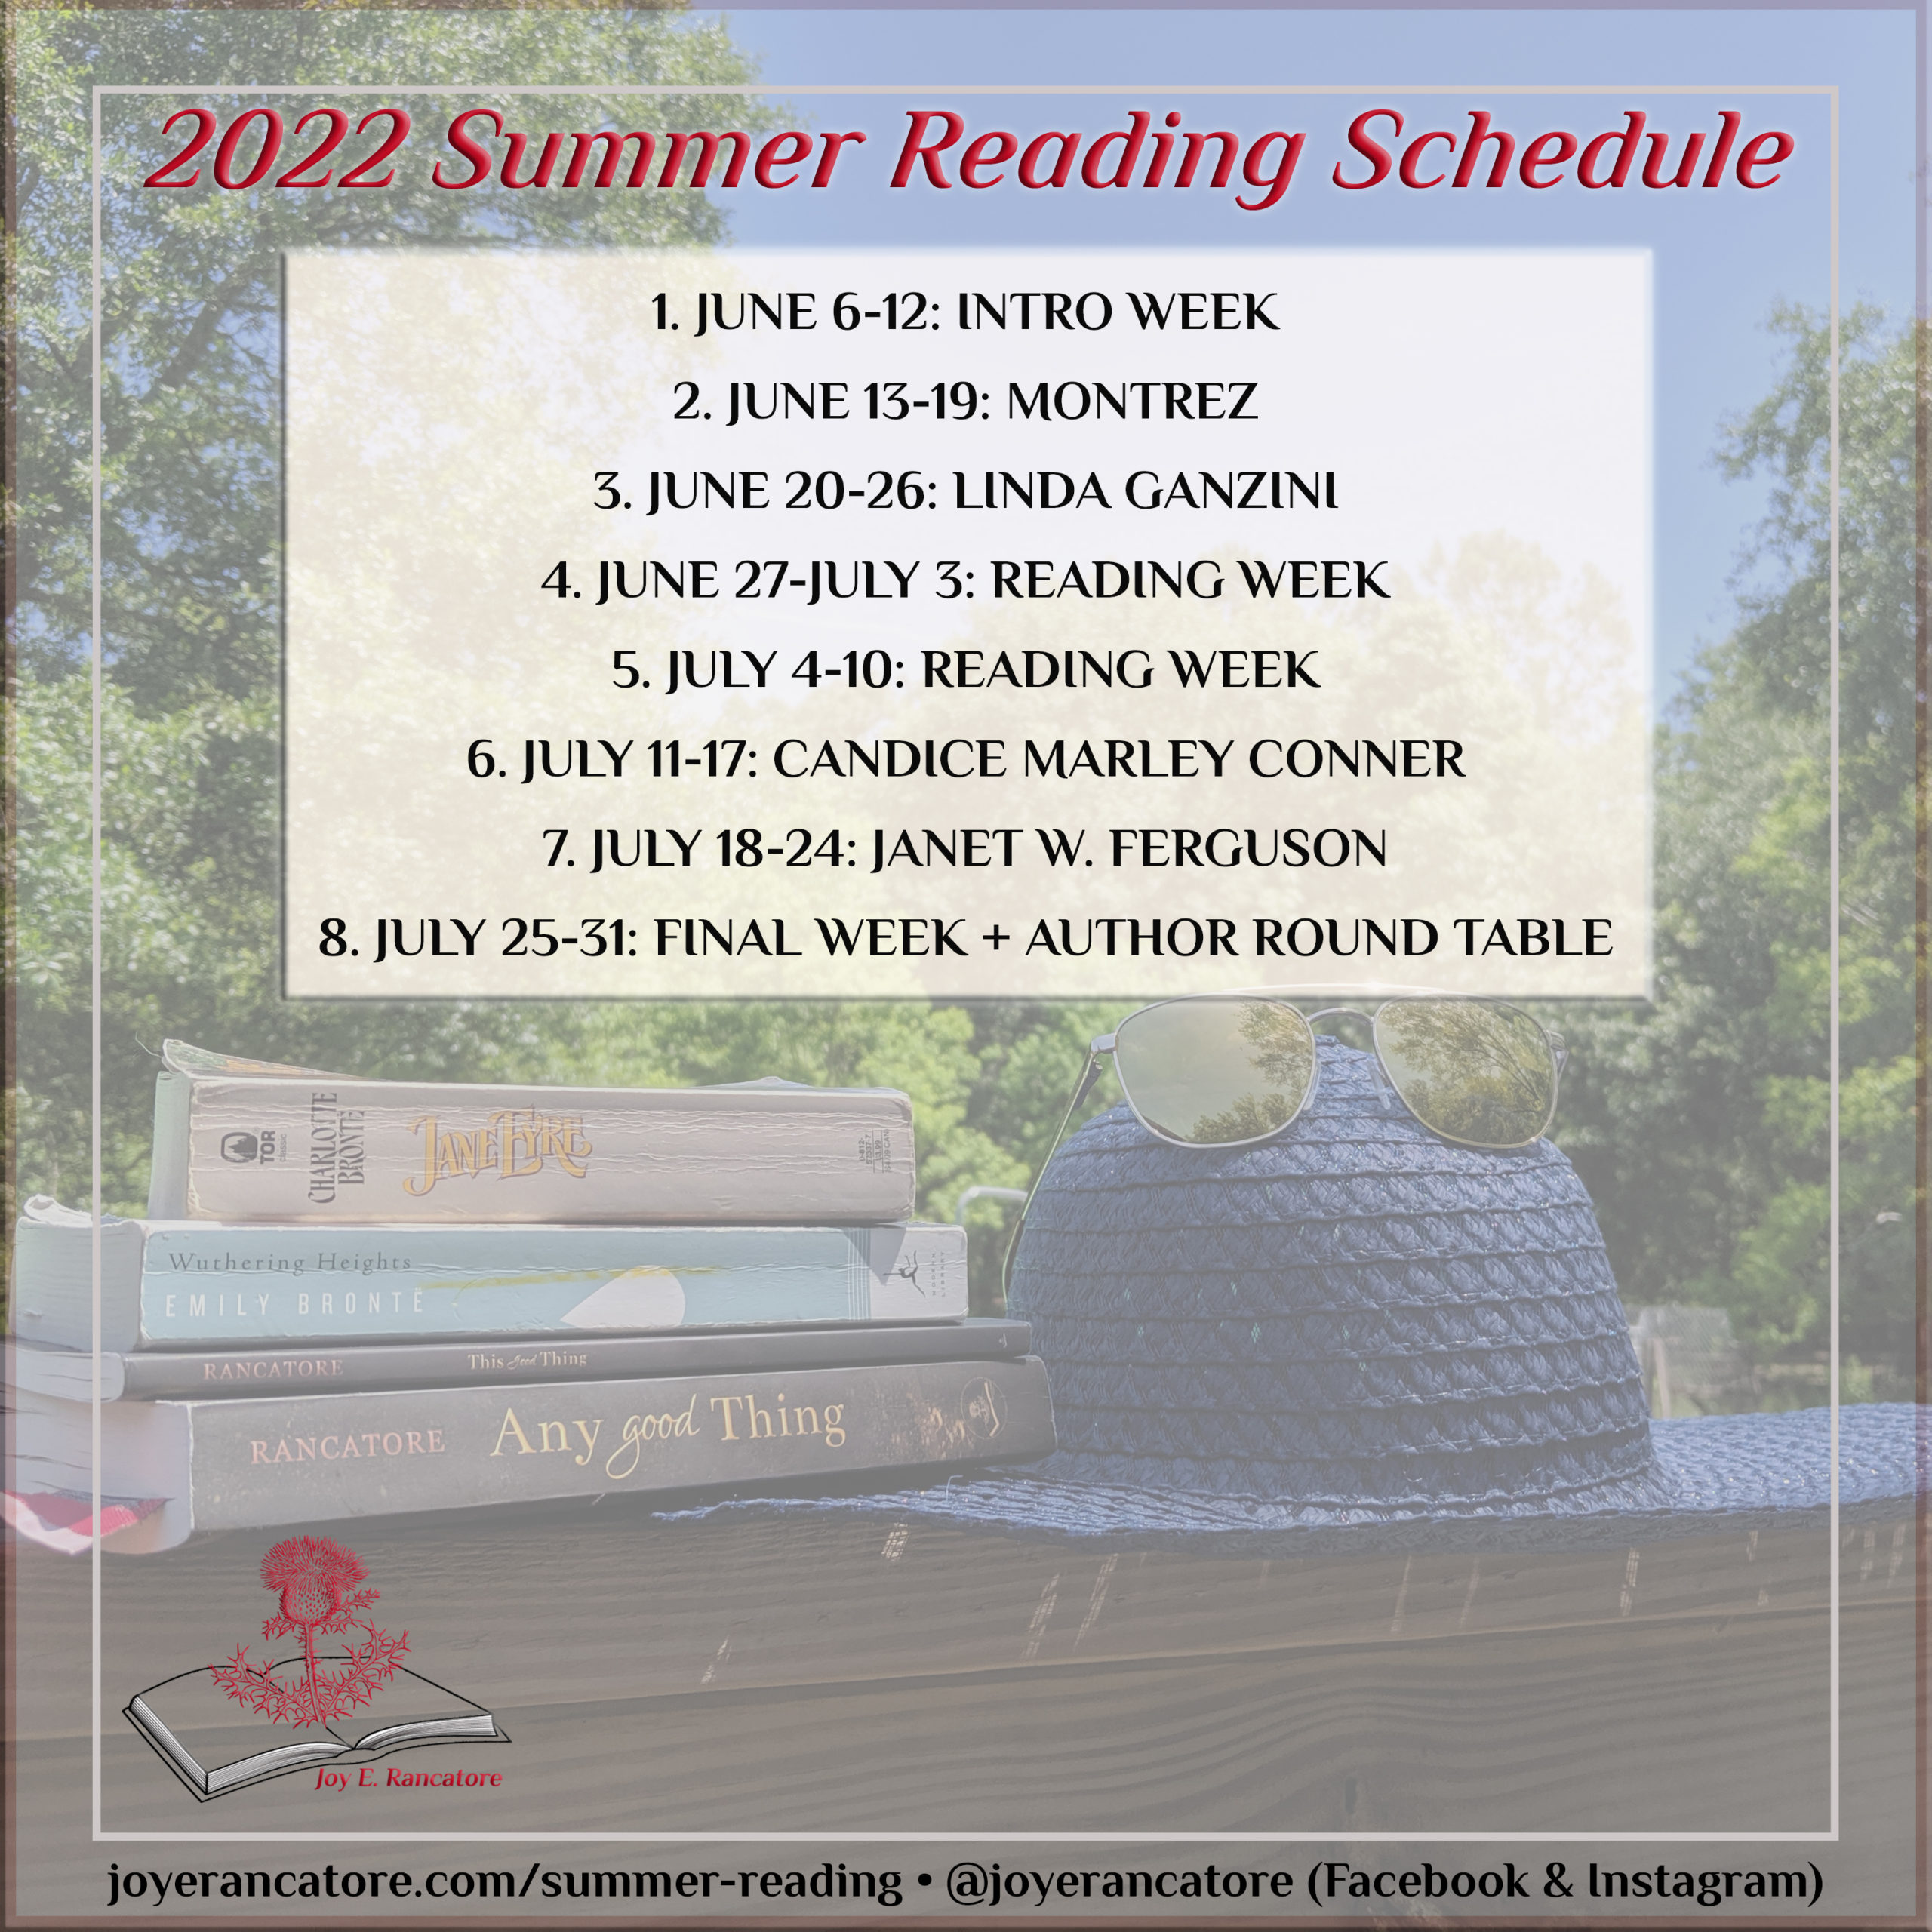 Weekly schedule for the 2022 Logos & Mythos Summer Reading Challenge